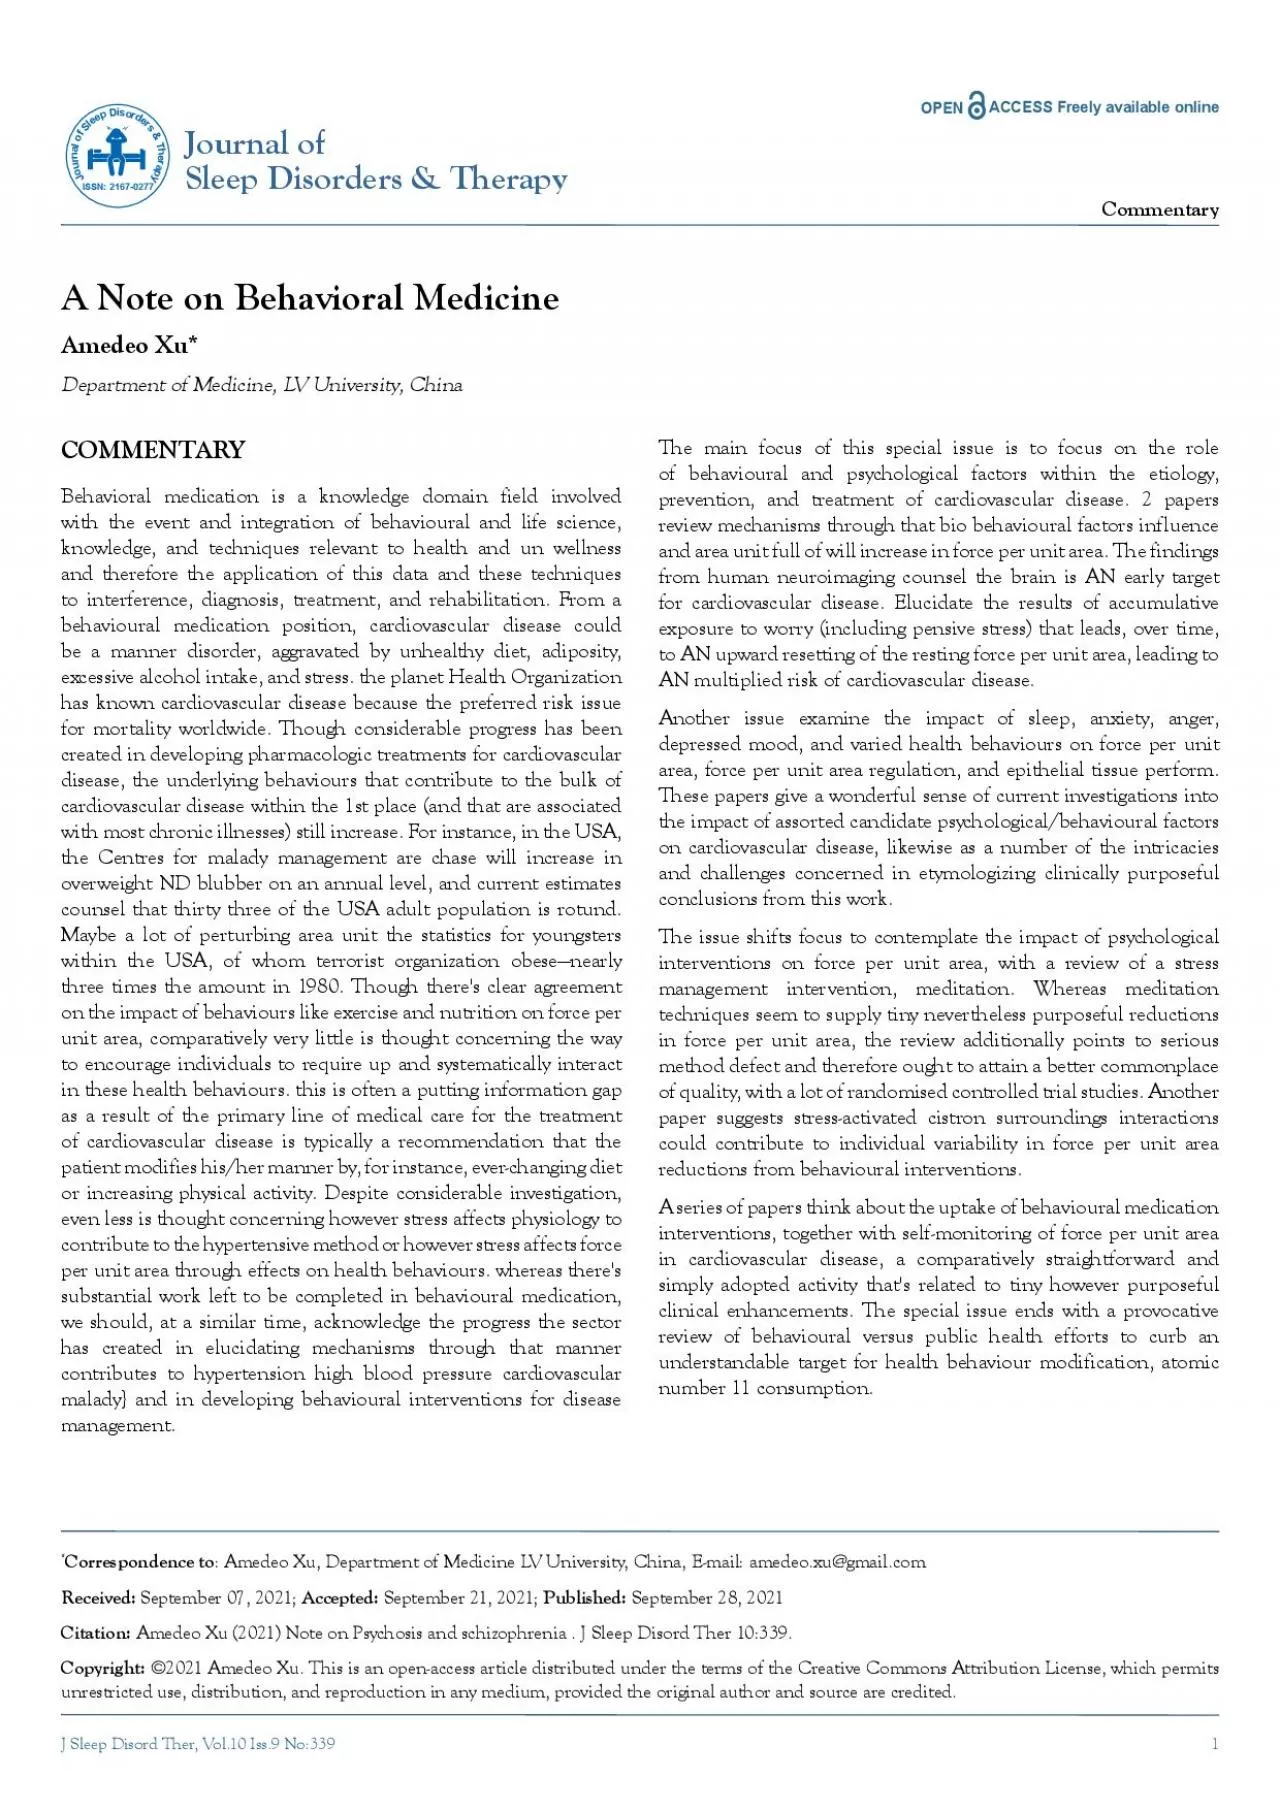 J Sleep Disord Ther Vol10 Iss9 No339A Note on Behavioral Medicine